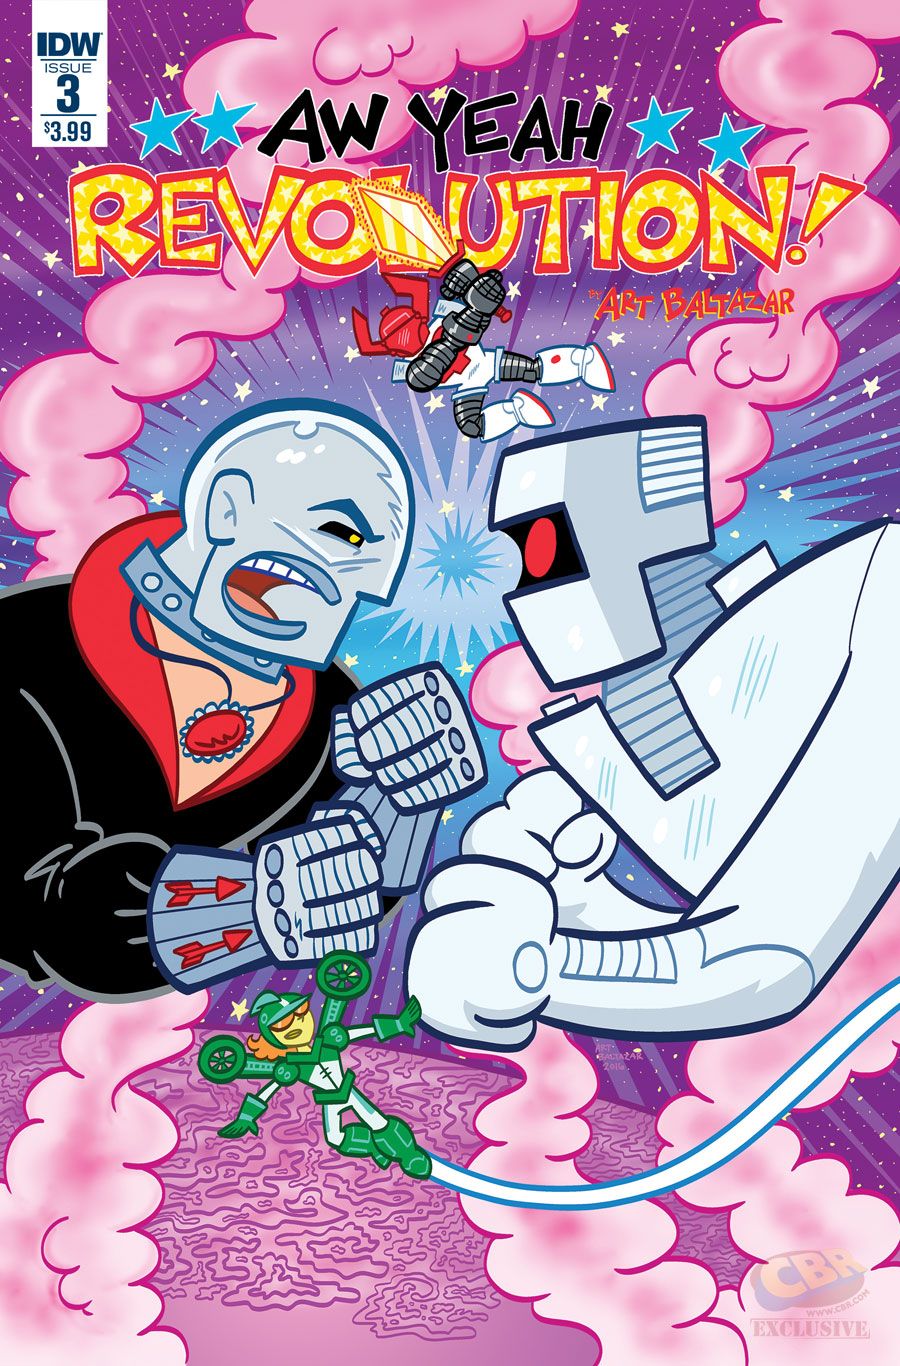 Revolution: Aw Yeah! #3 cover